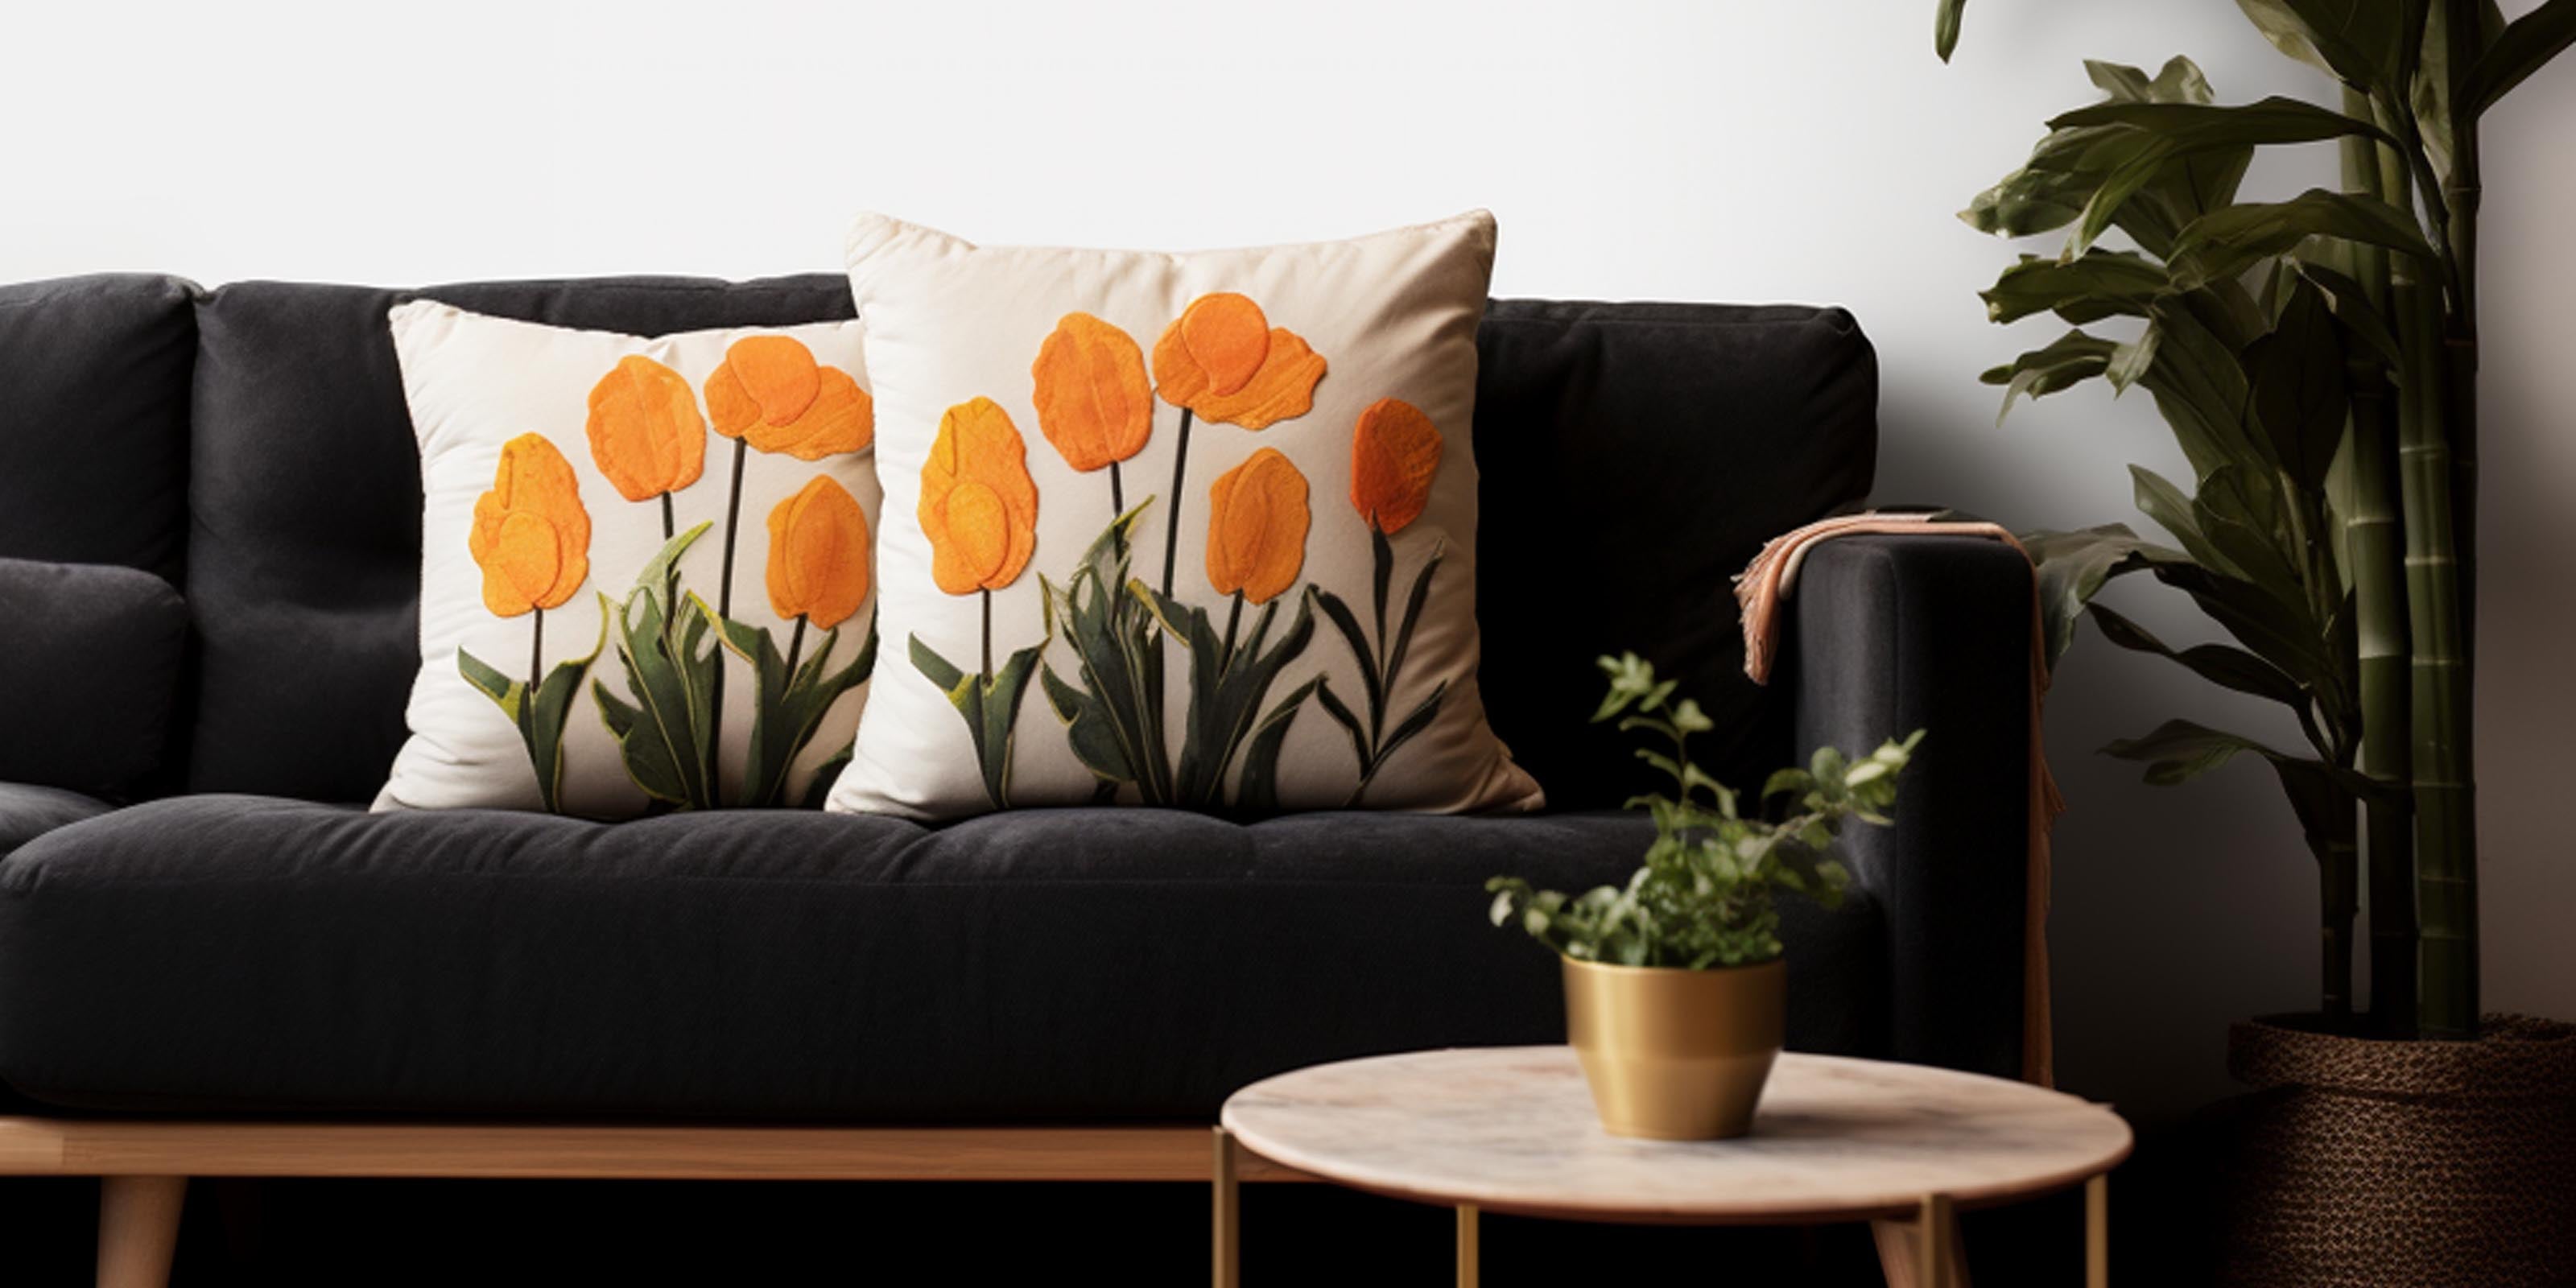 FLORAL cushion covers on black sofa